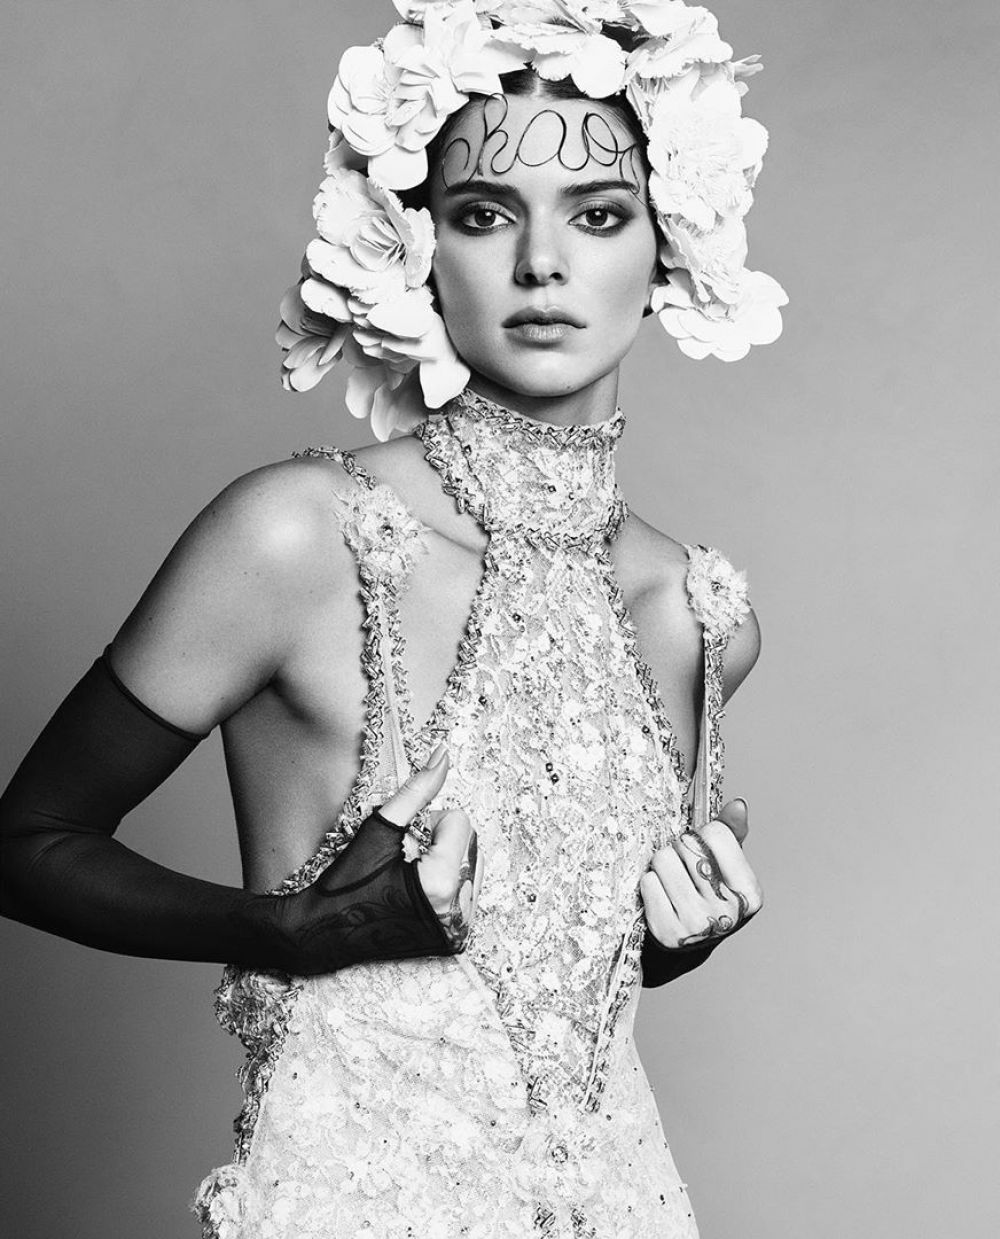 Kendall Jenner For Chaos Sixtynine No5 Chanel Issue By Luigi Lango August